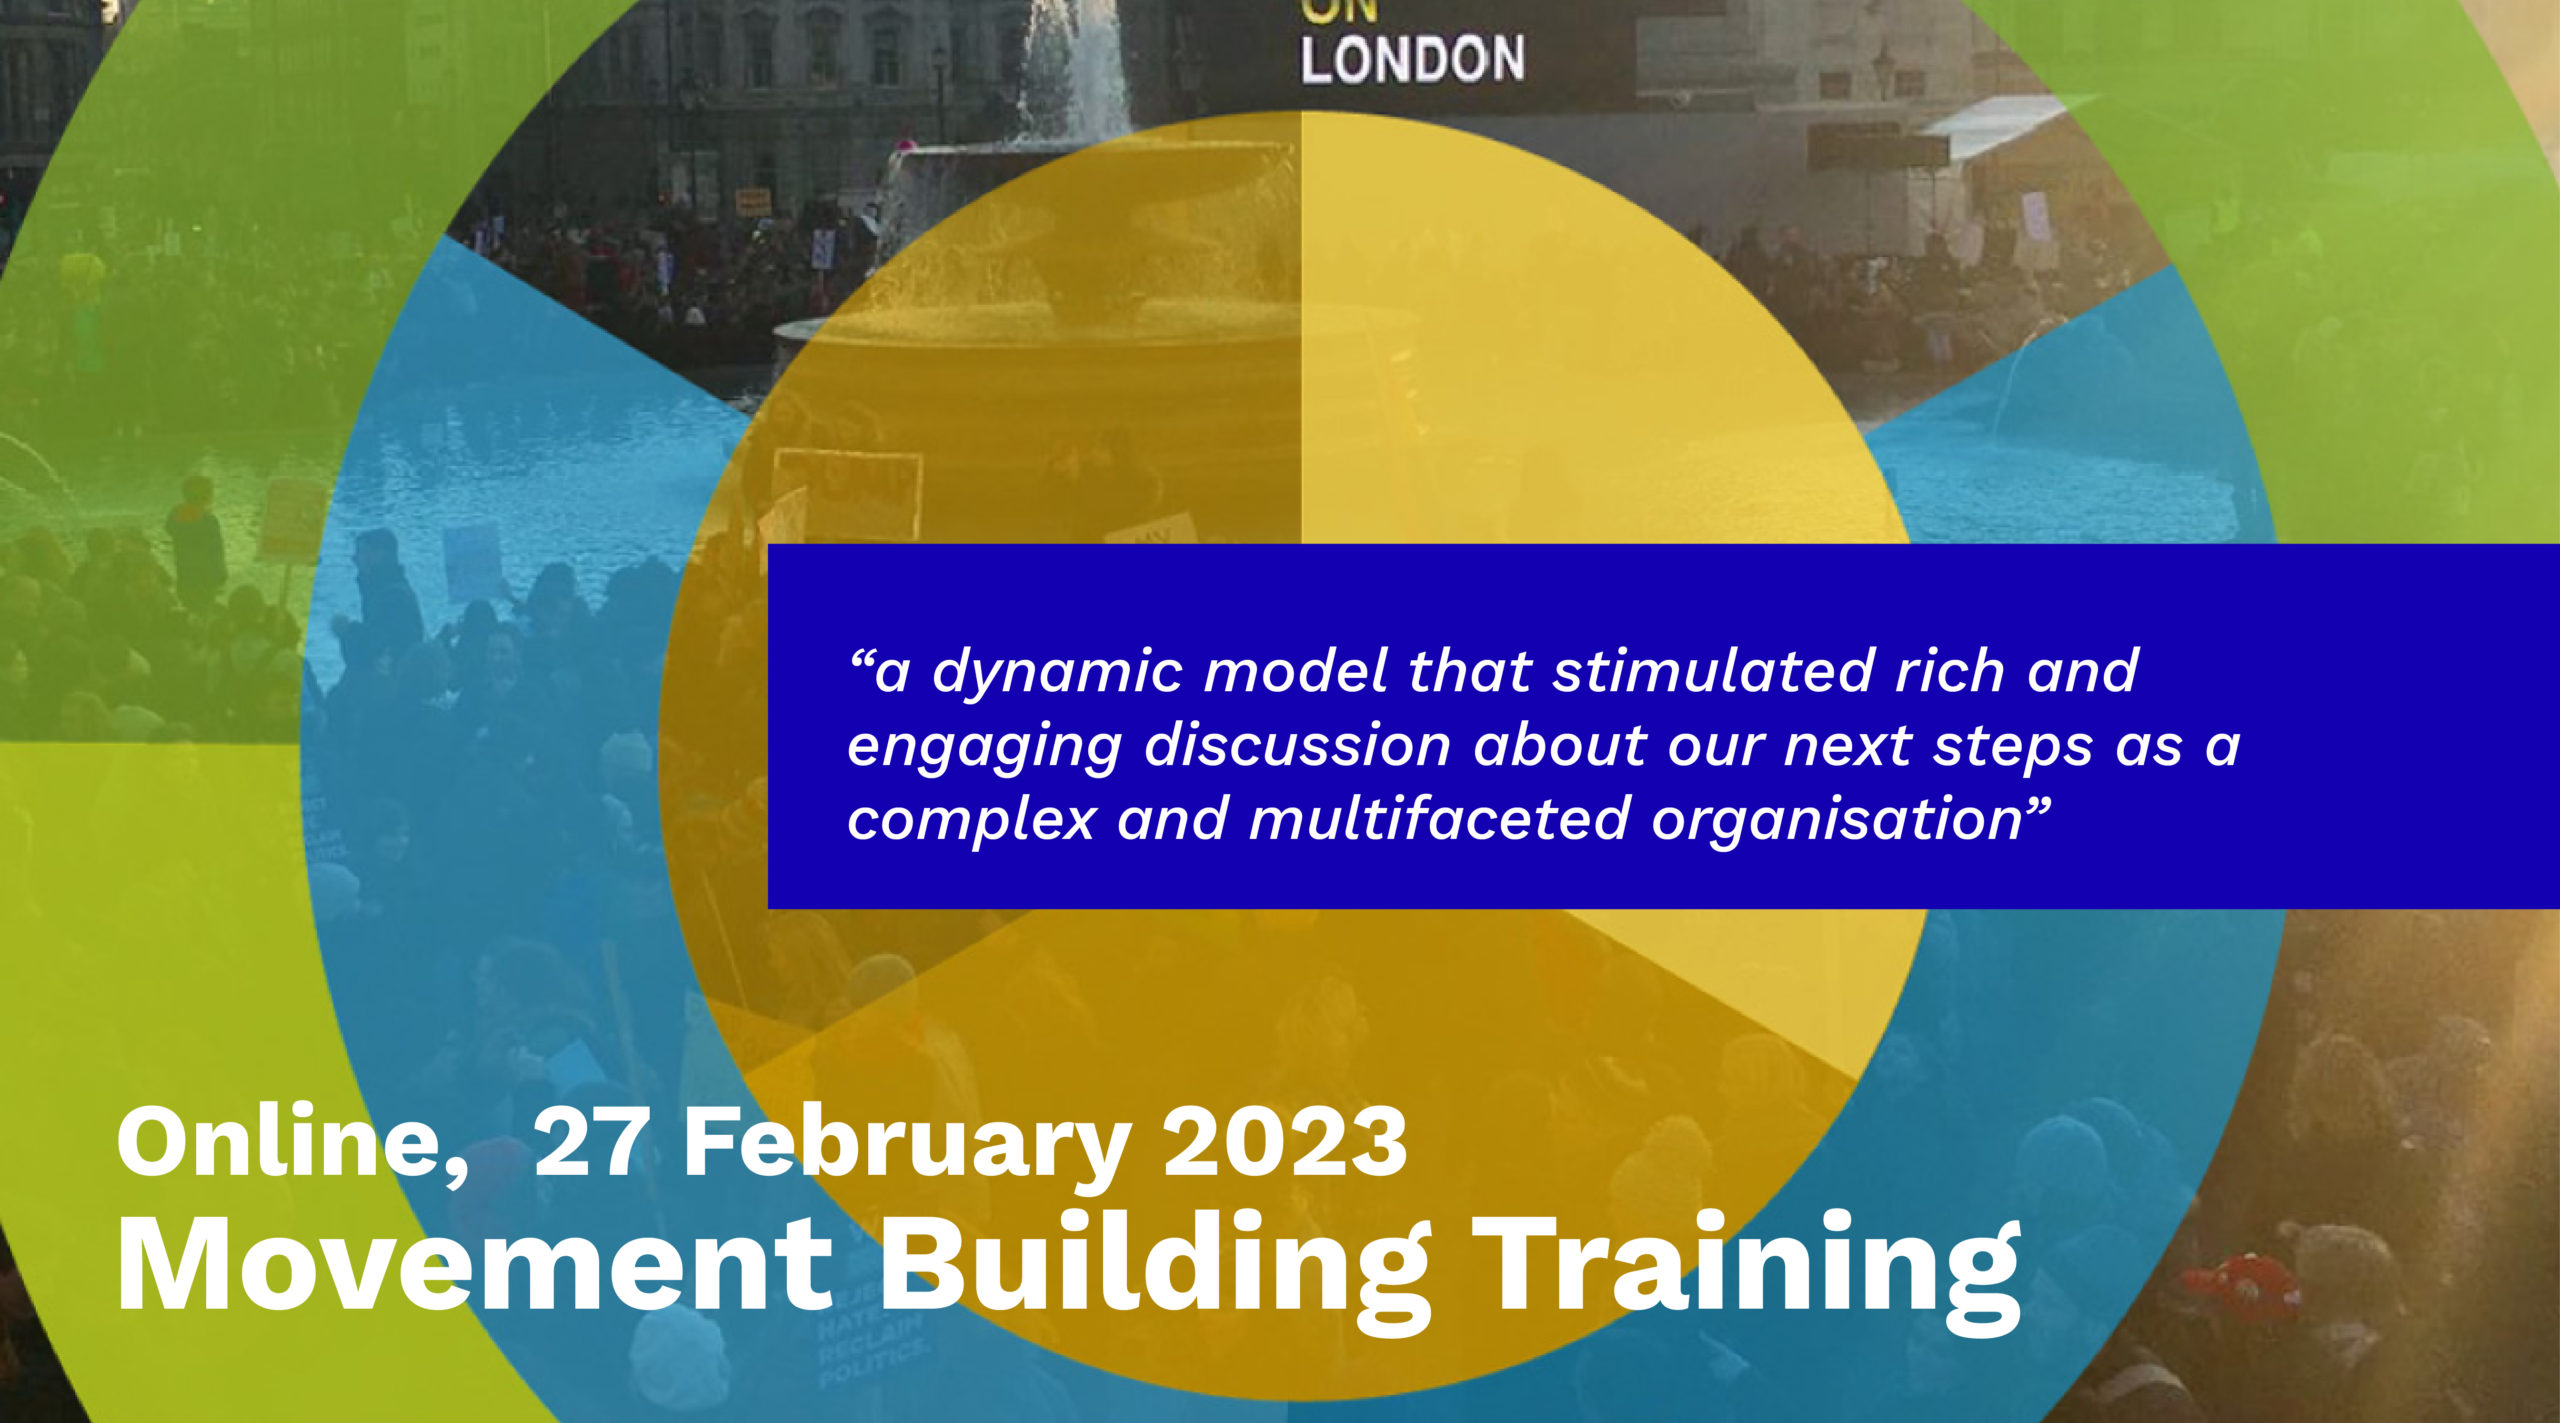 Movement Building online training, 27 February 2023